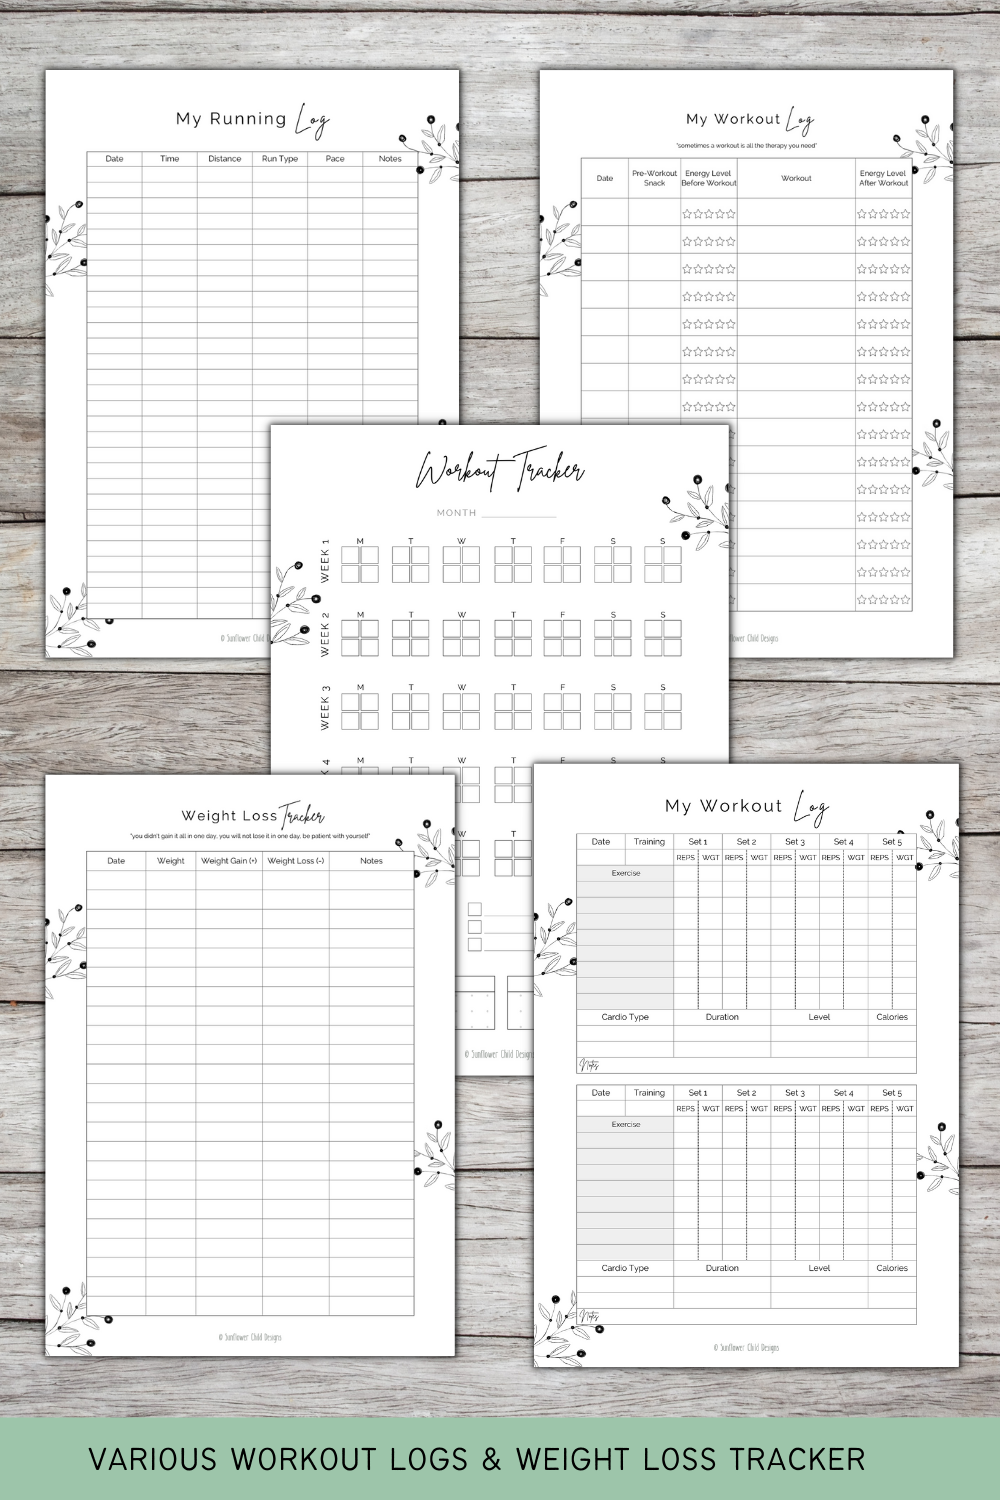 Book Review Printable Journal Pages — Sunflower Child Designs